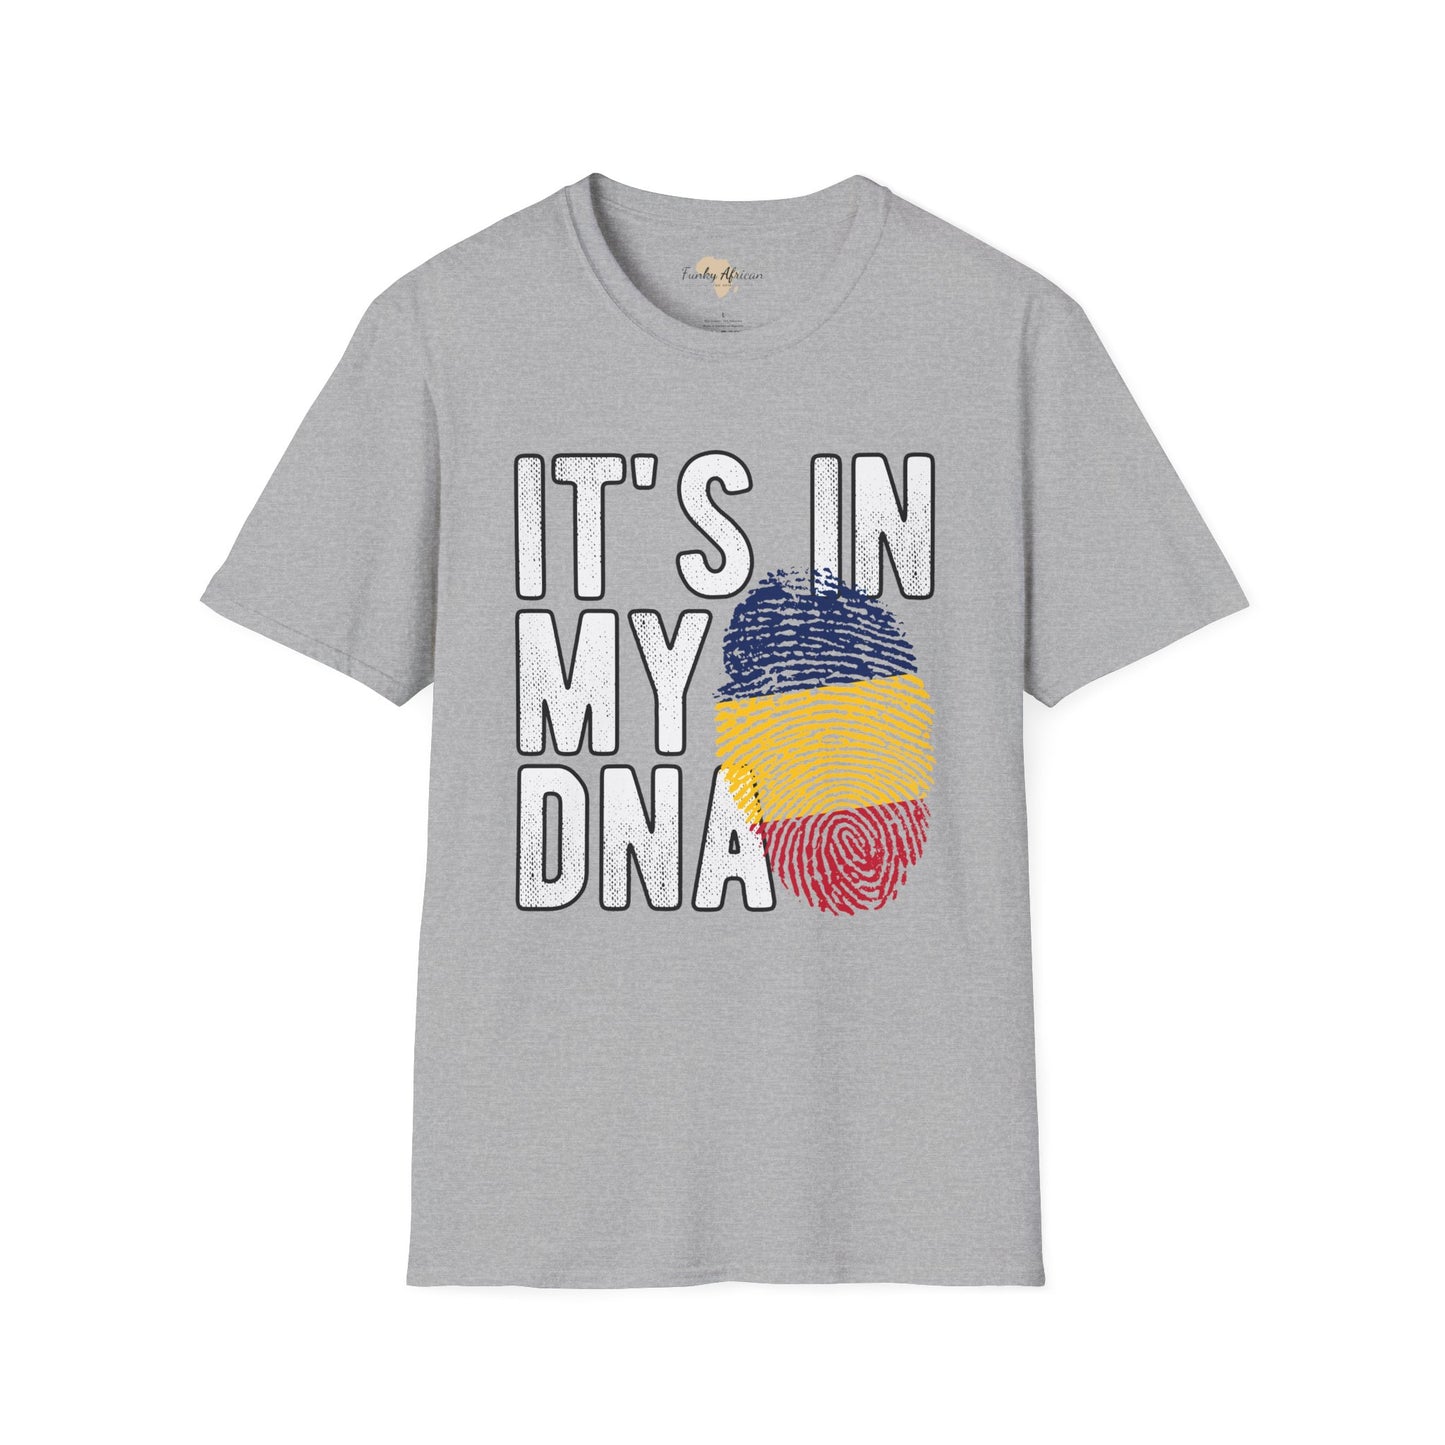 it's in my DNA unisex tee - Chad